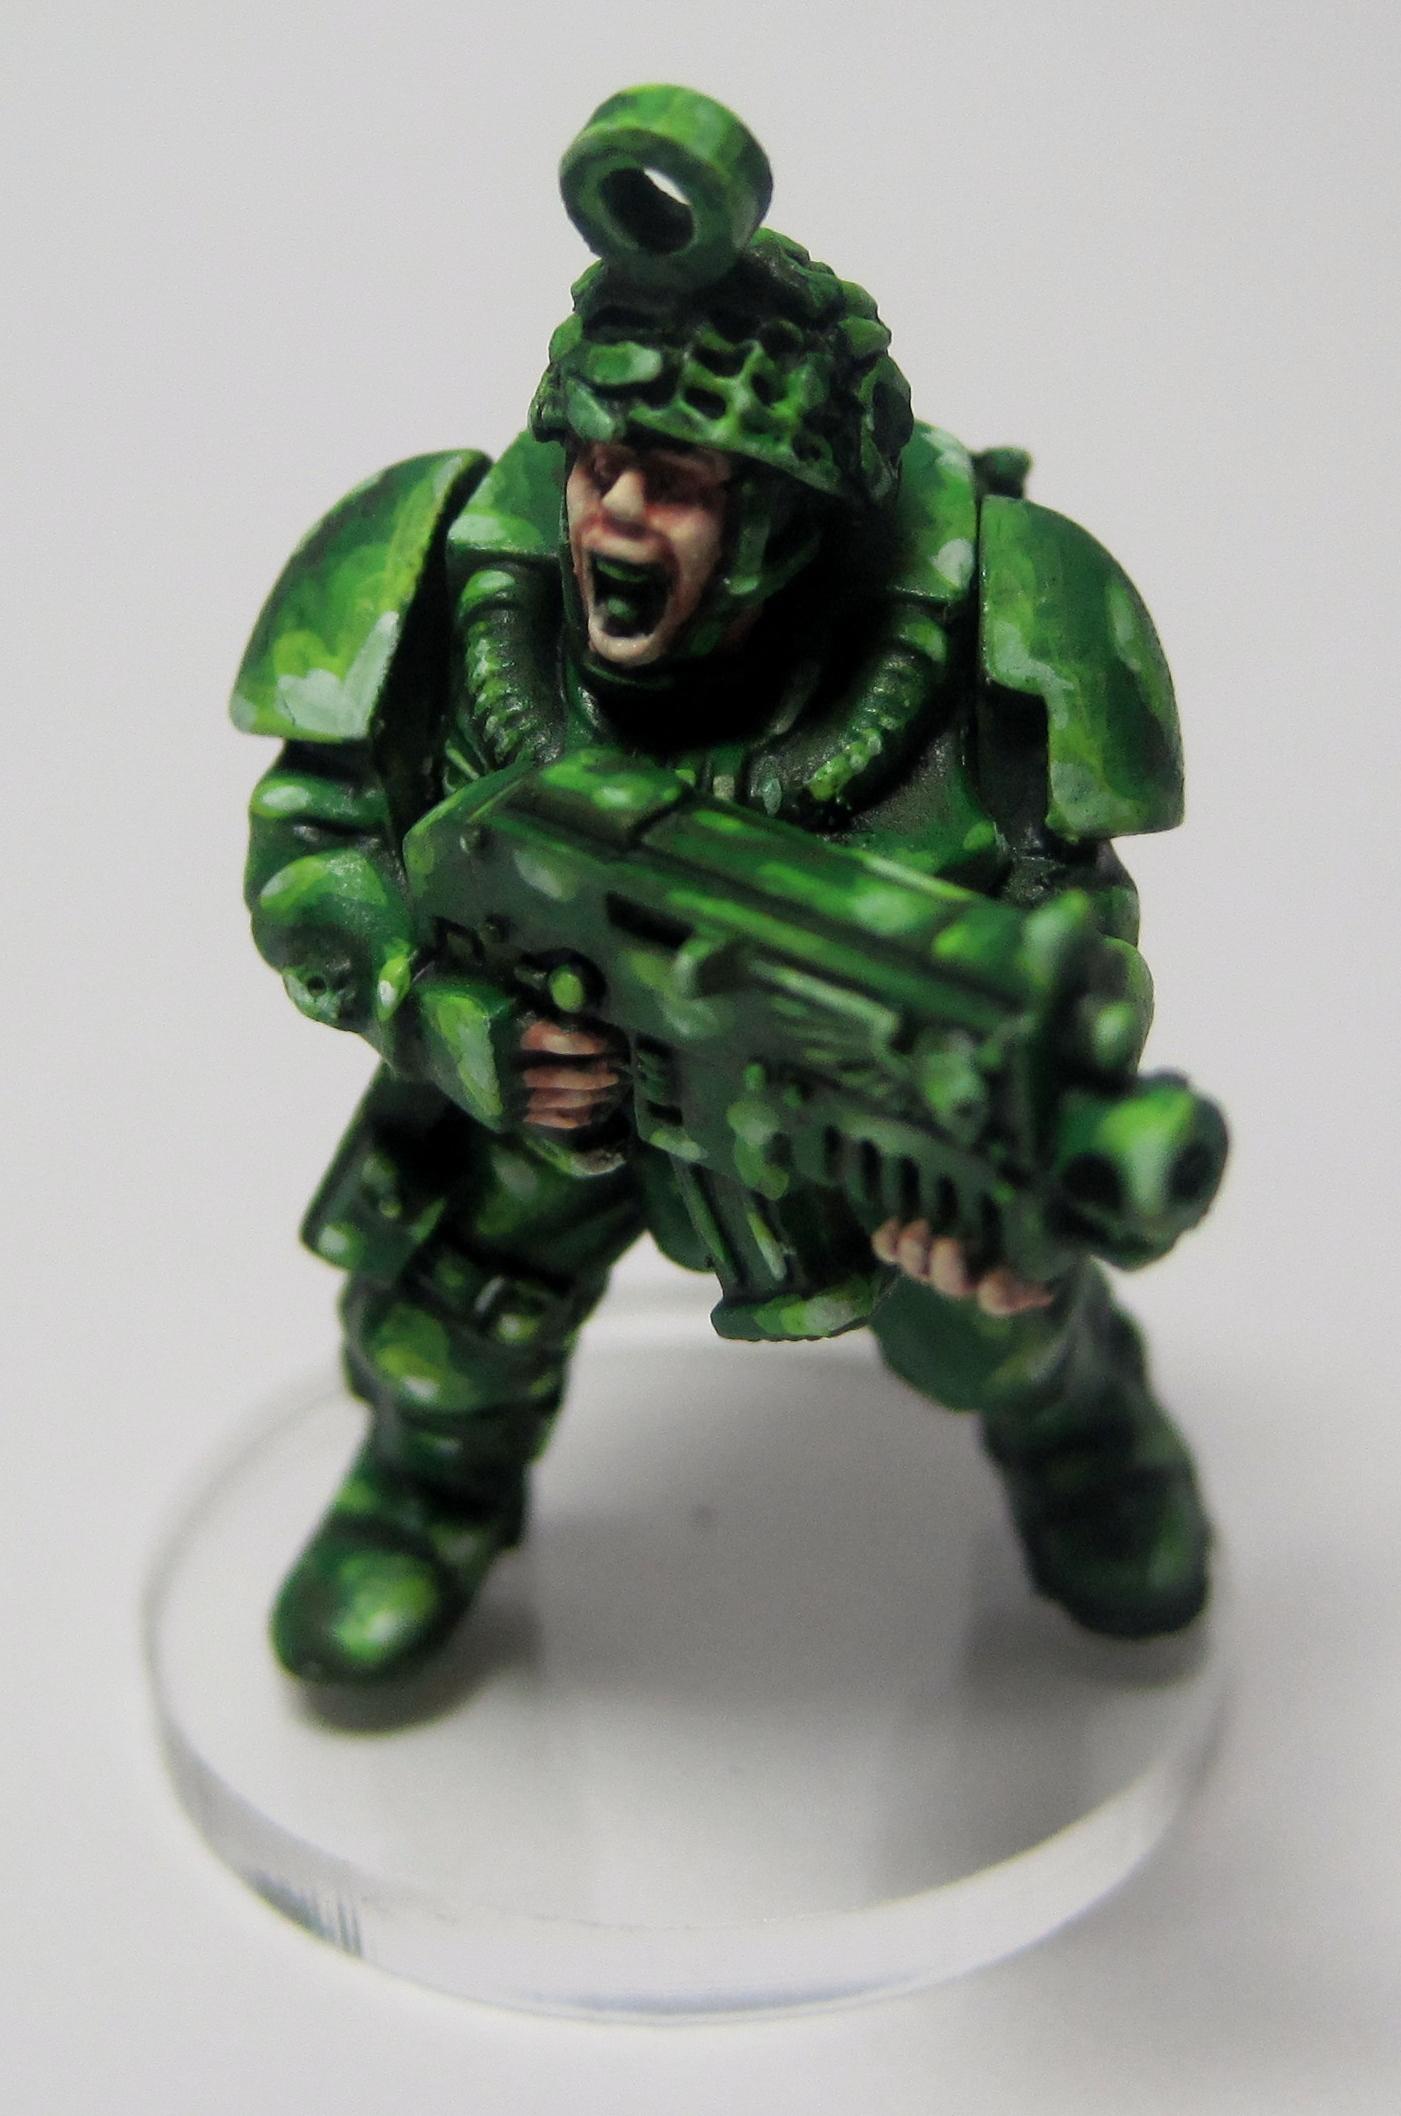 Army Men, Fun, Scouts, Space Marine Scouts, Toy Story, Warhammer 40,000